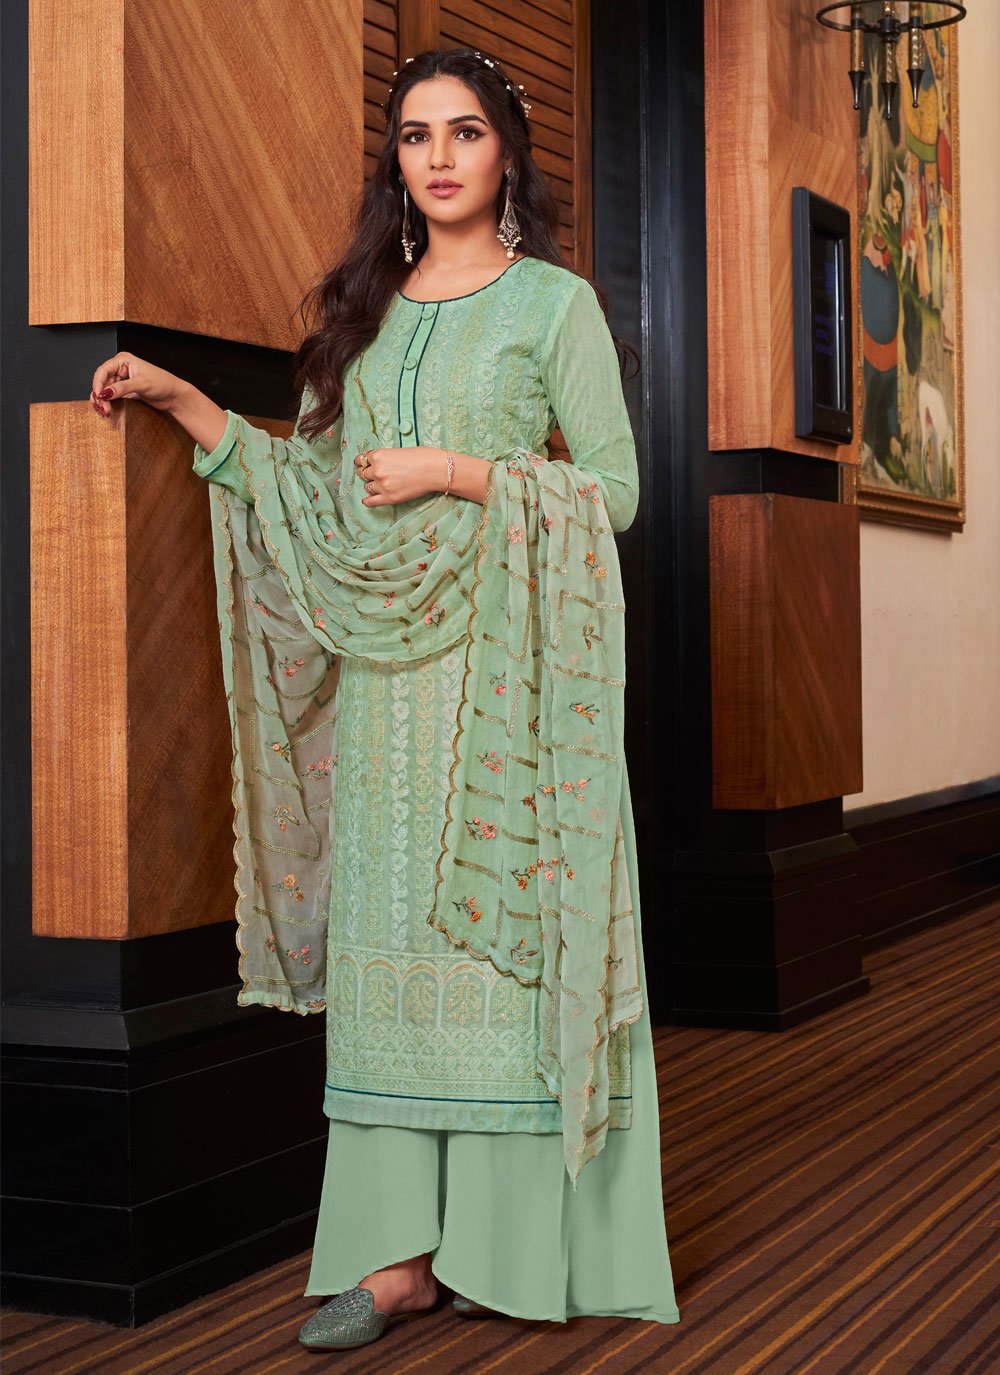 Sea Green color Faux Georgette Designer Pakistani Salwar Suit with Embroidered